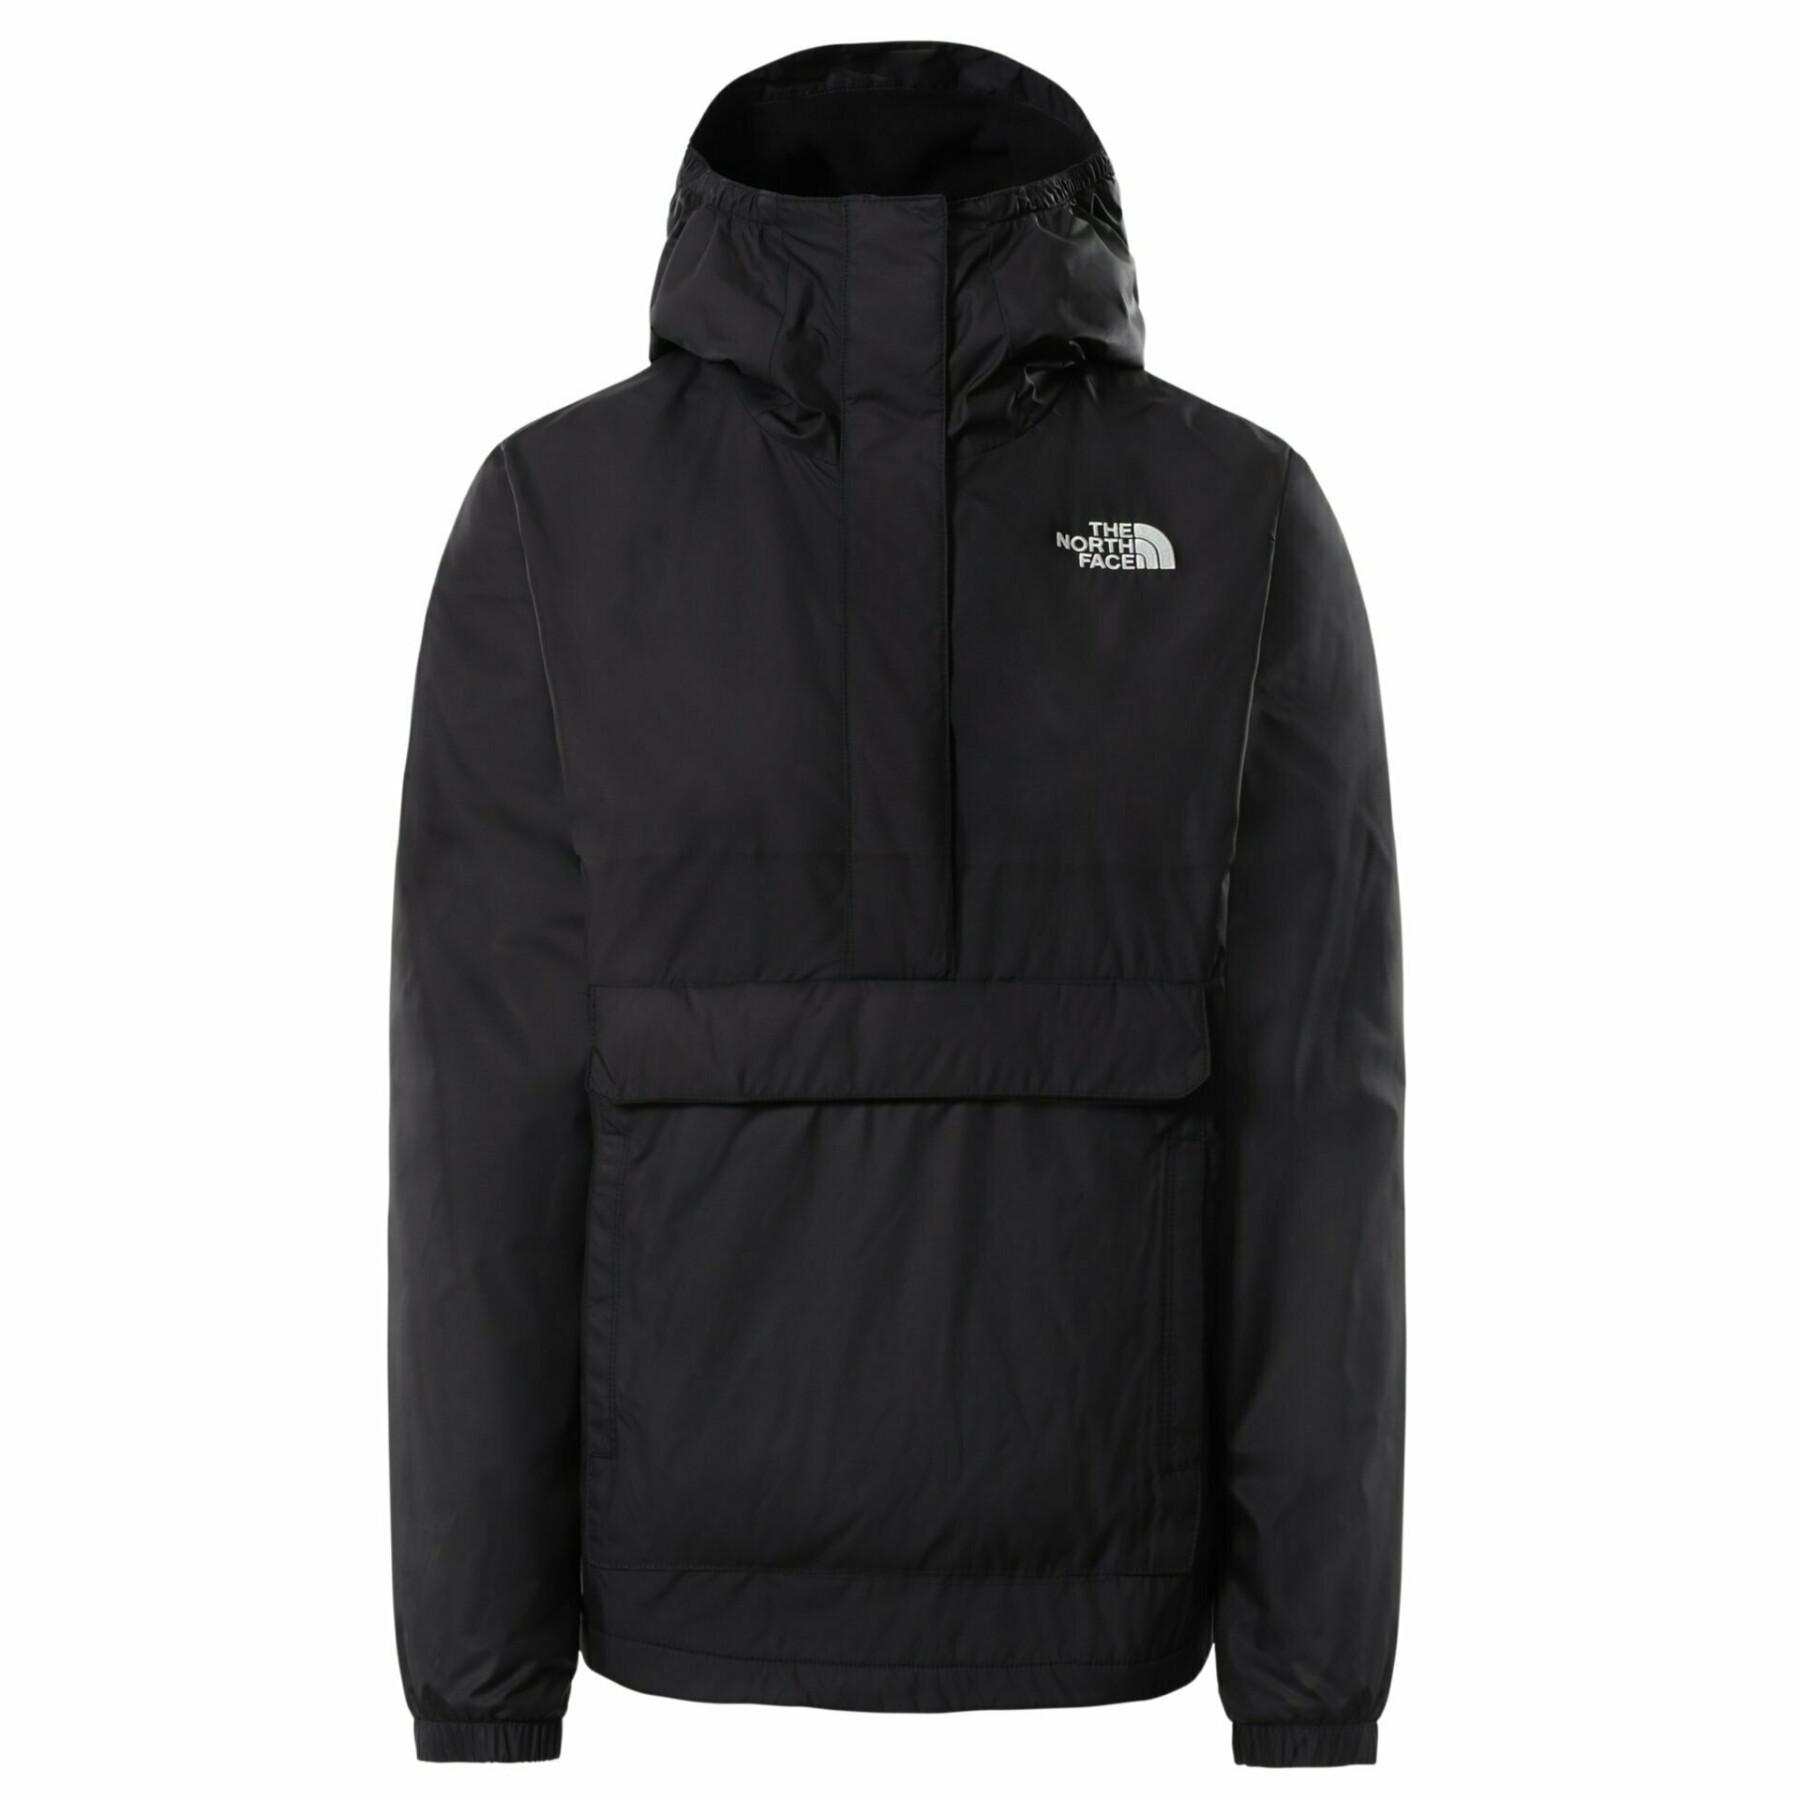 Anorak de mujer The North Face Insulated